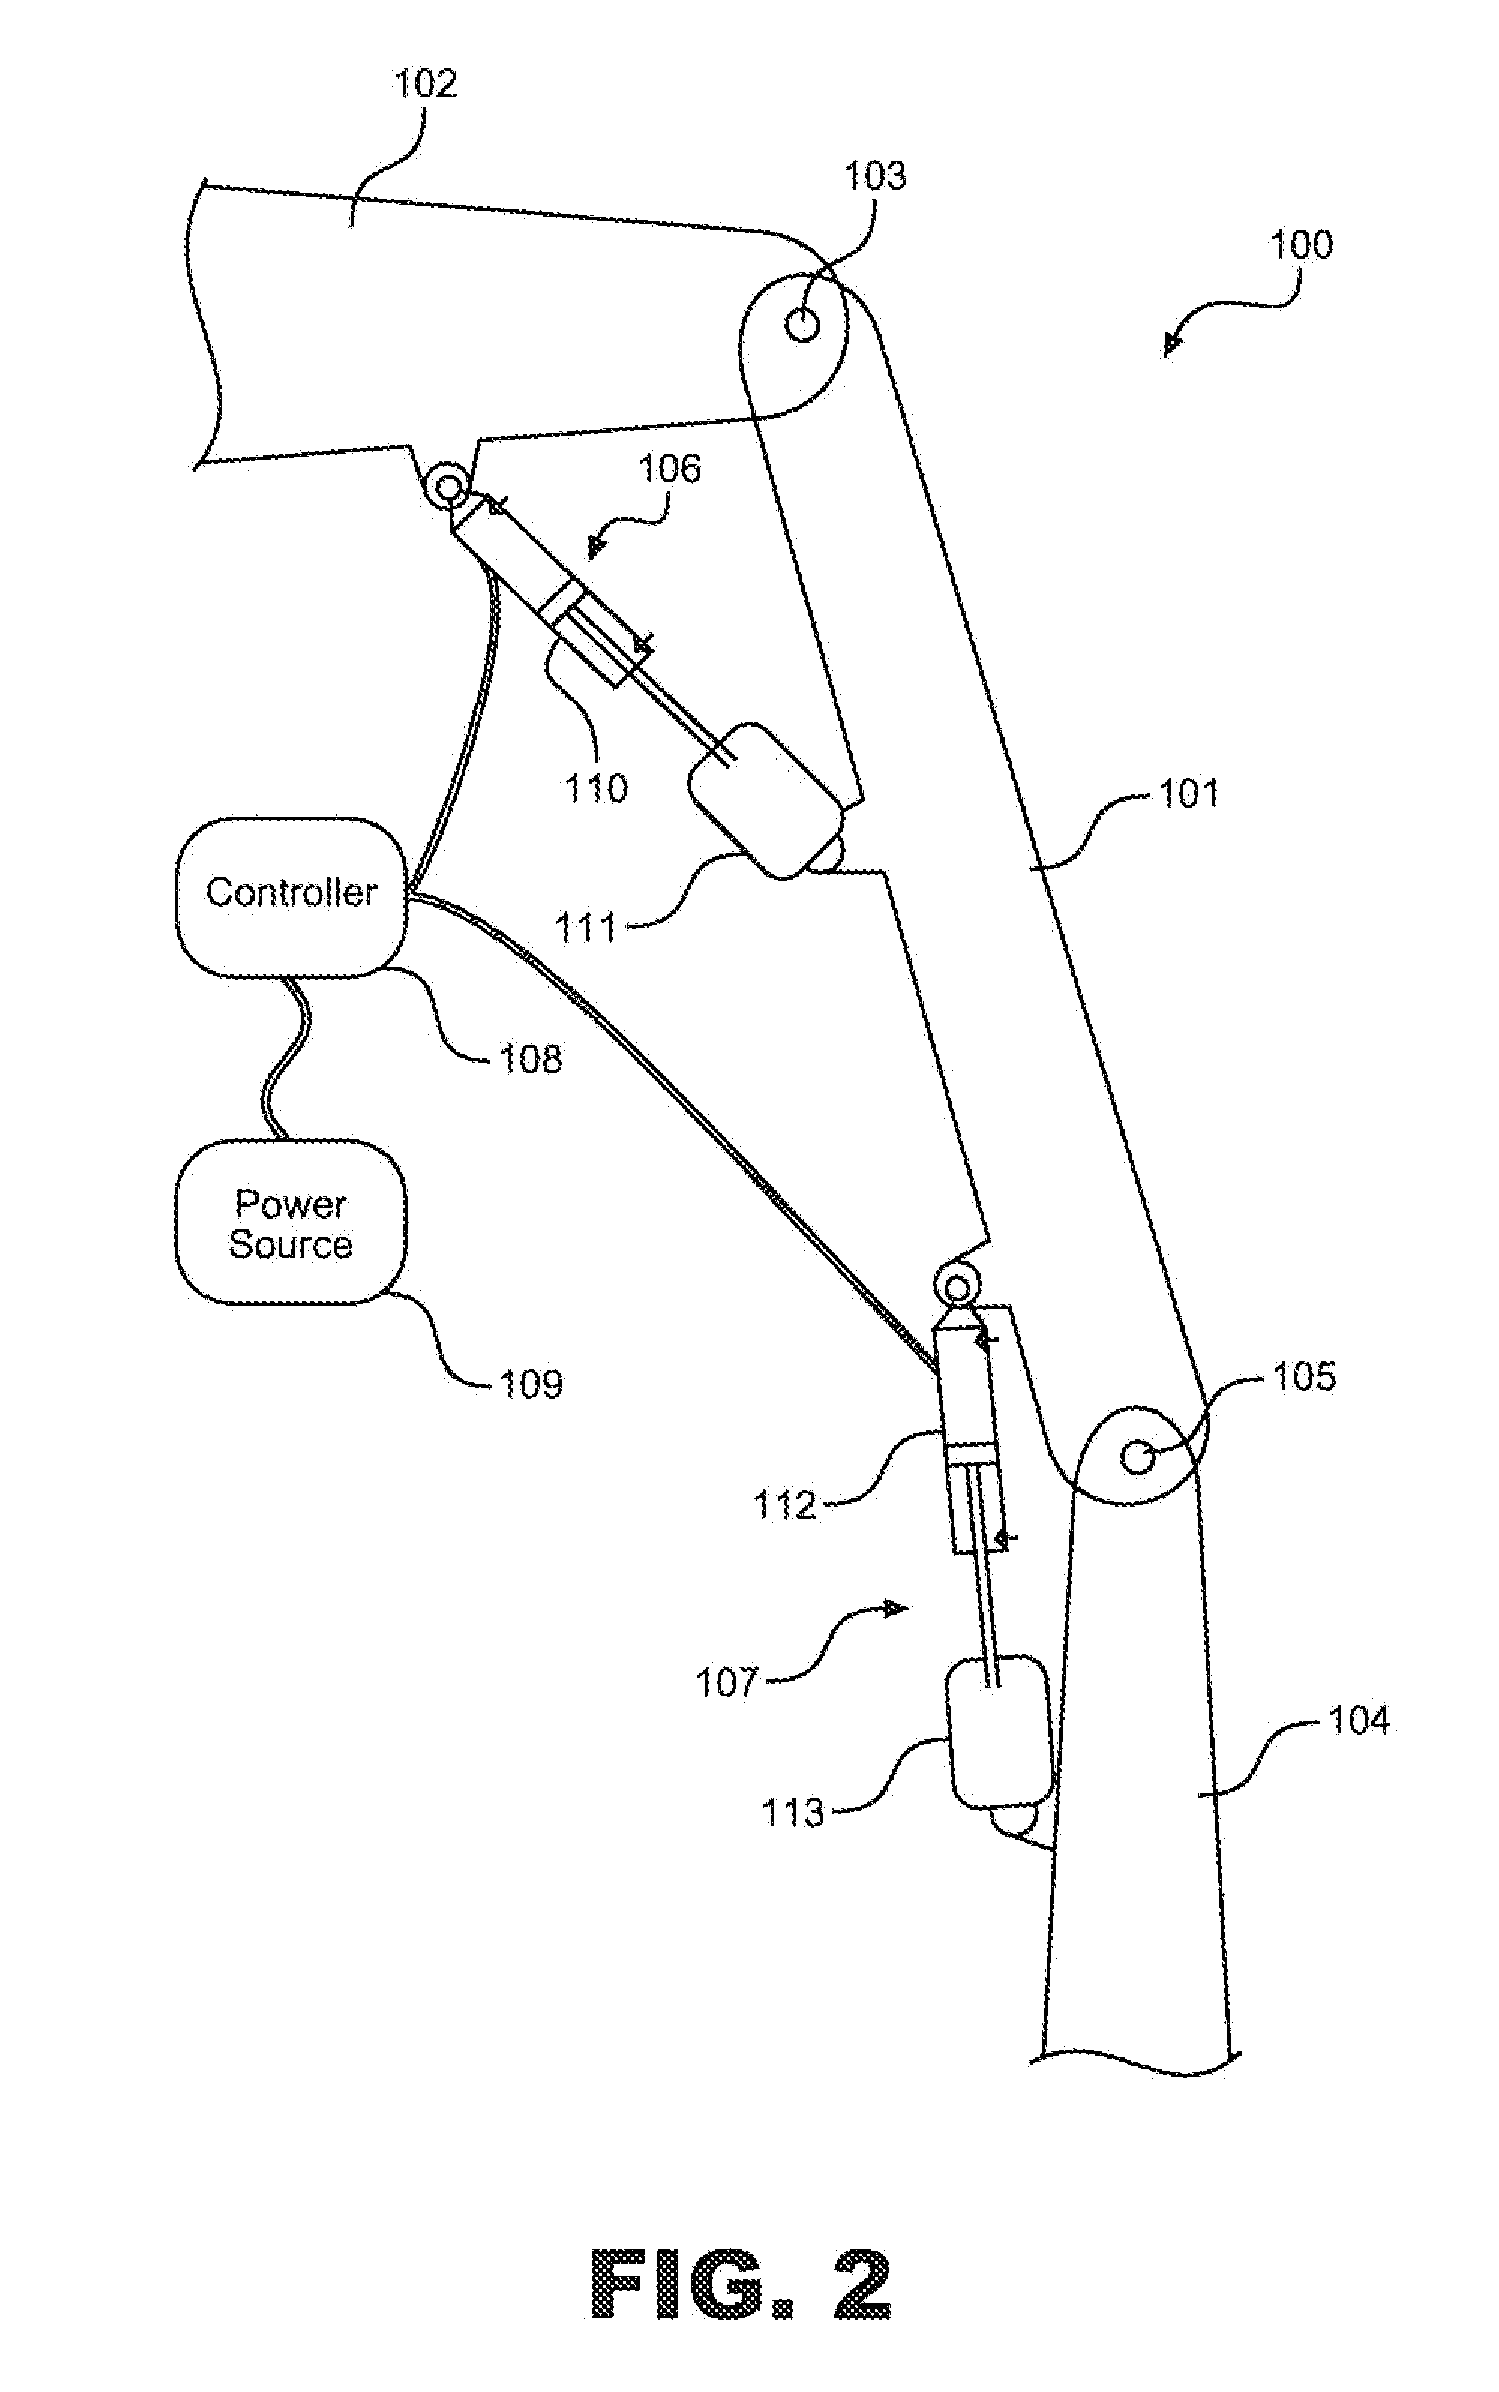 Hip and Knee Actuation Systems for Lower Limb Orthotic Devices